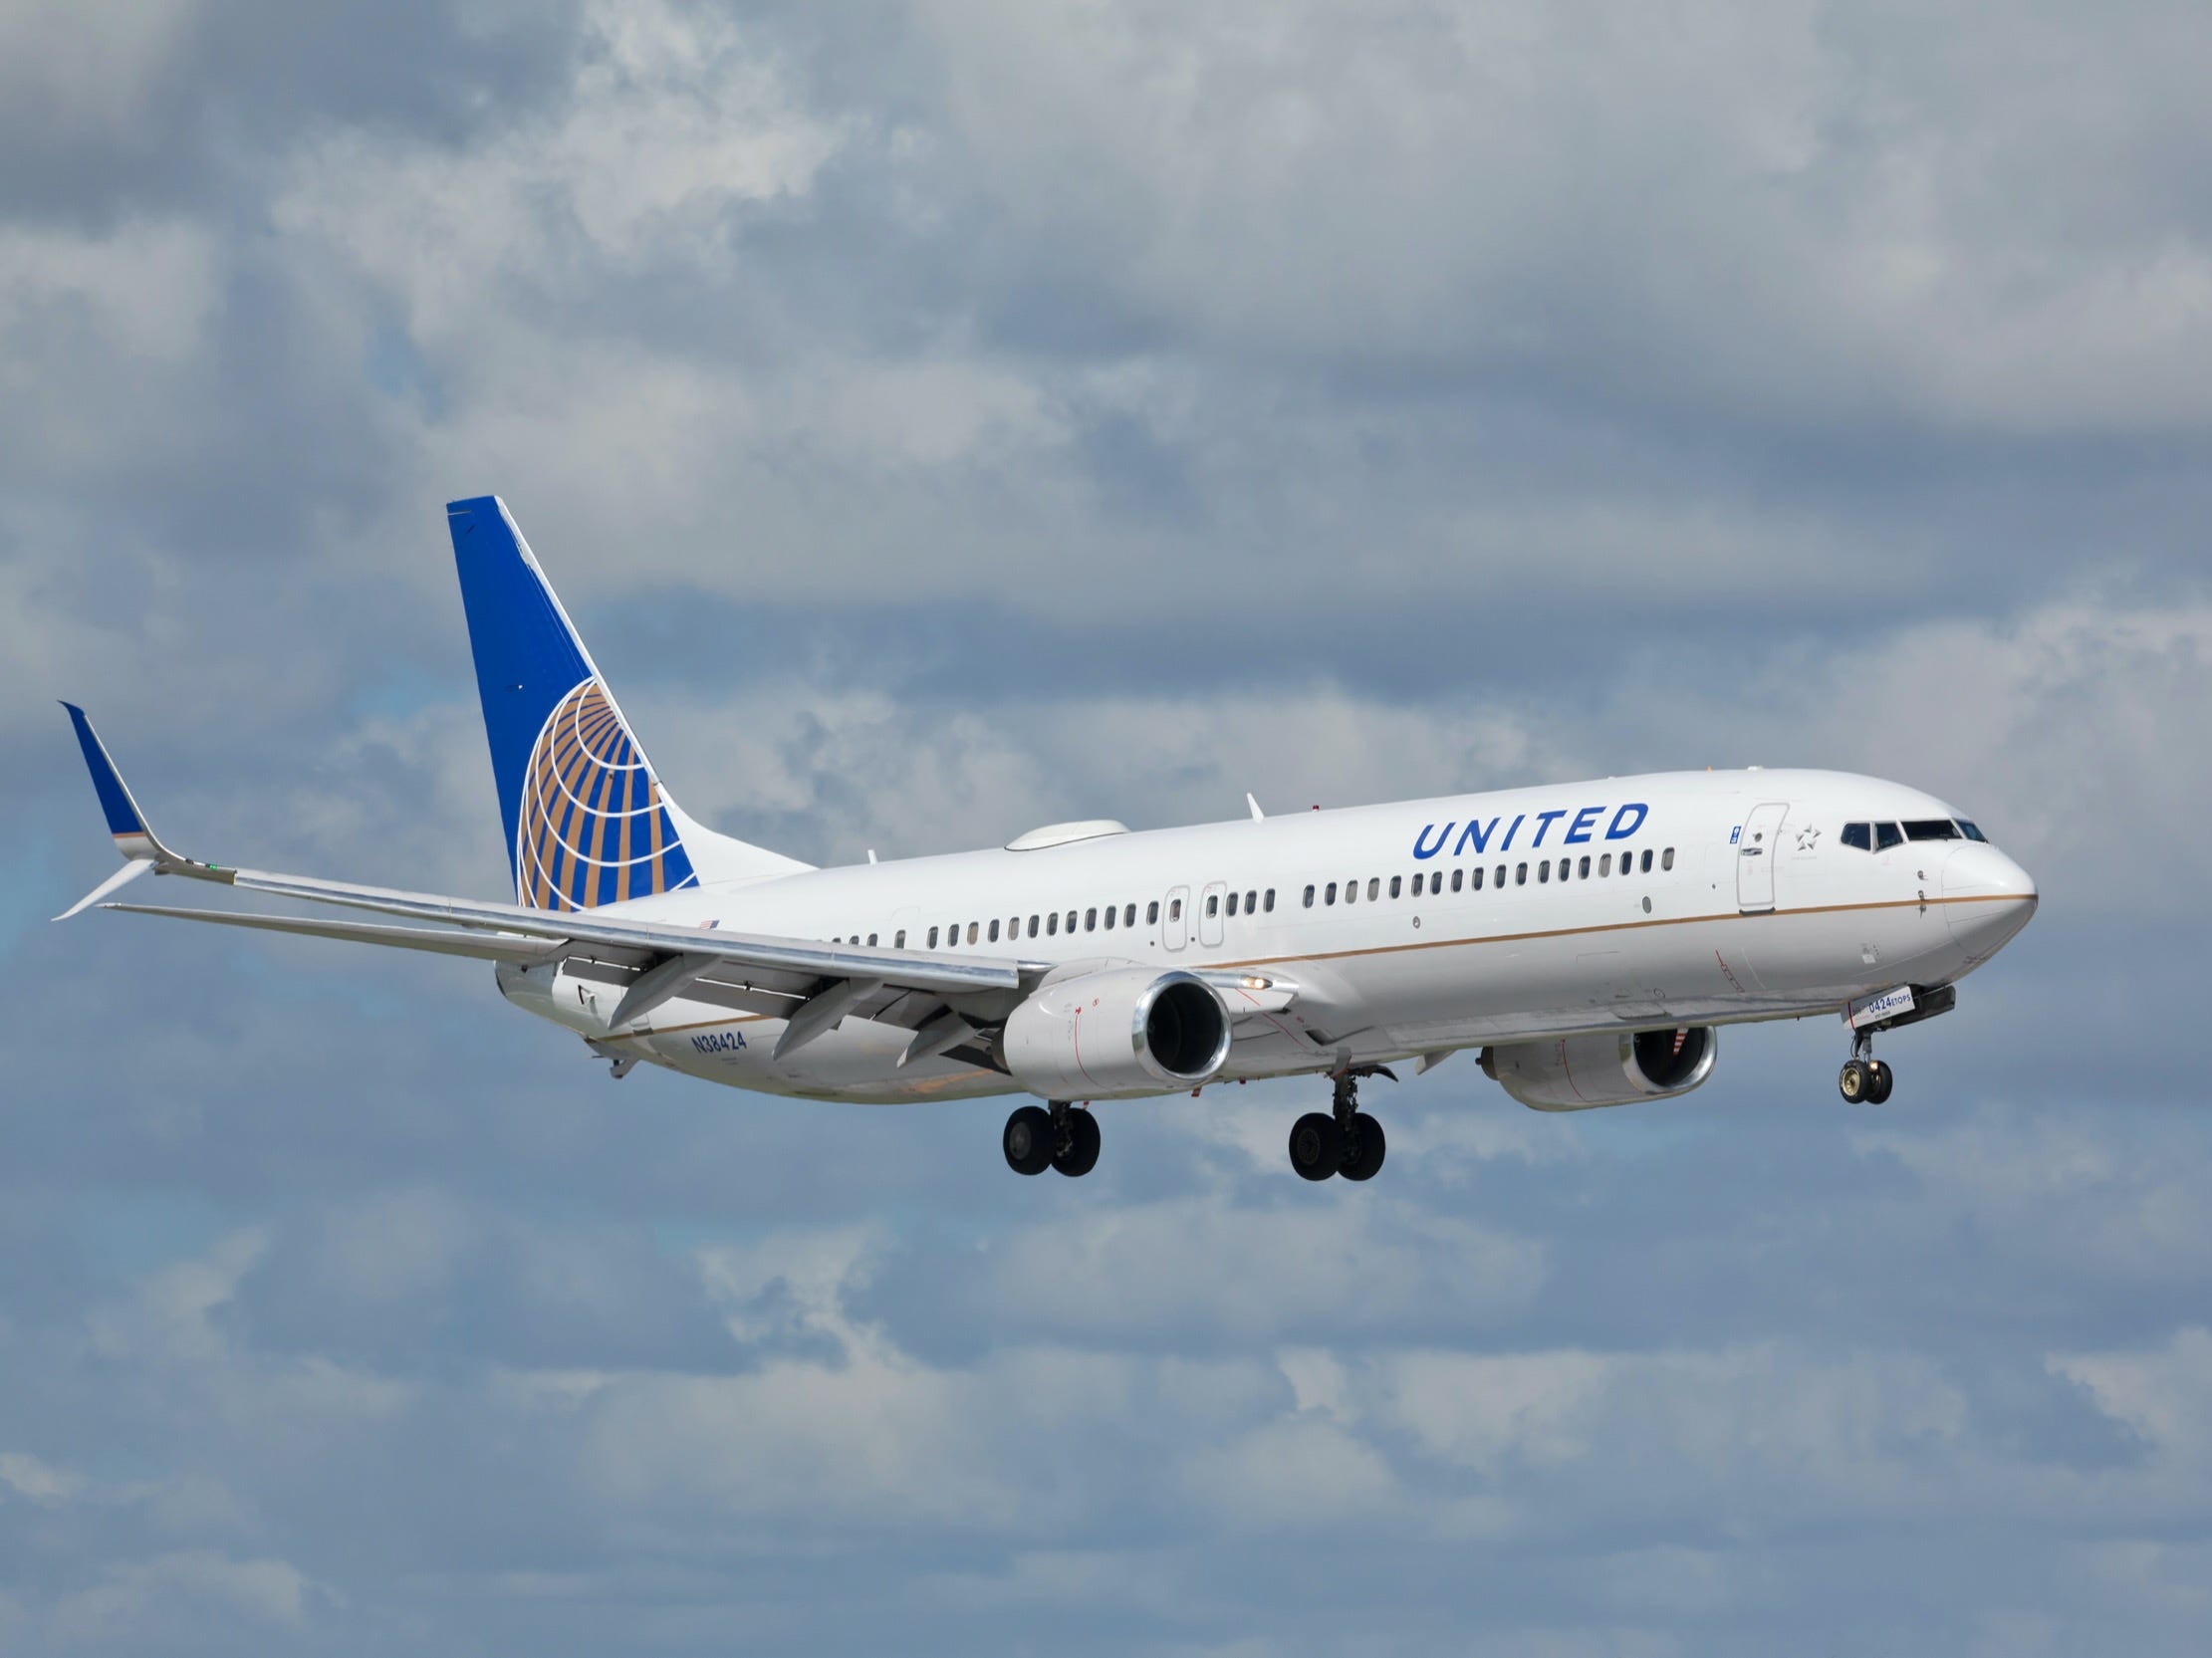 United Airlines Boeing 737